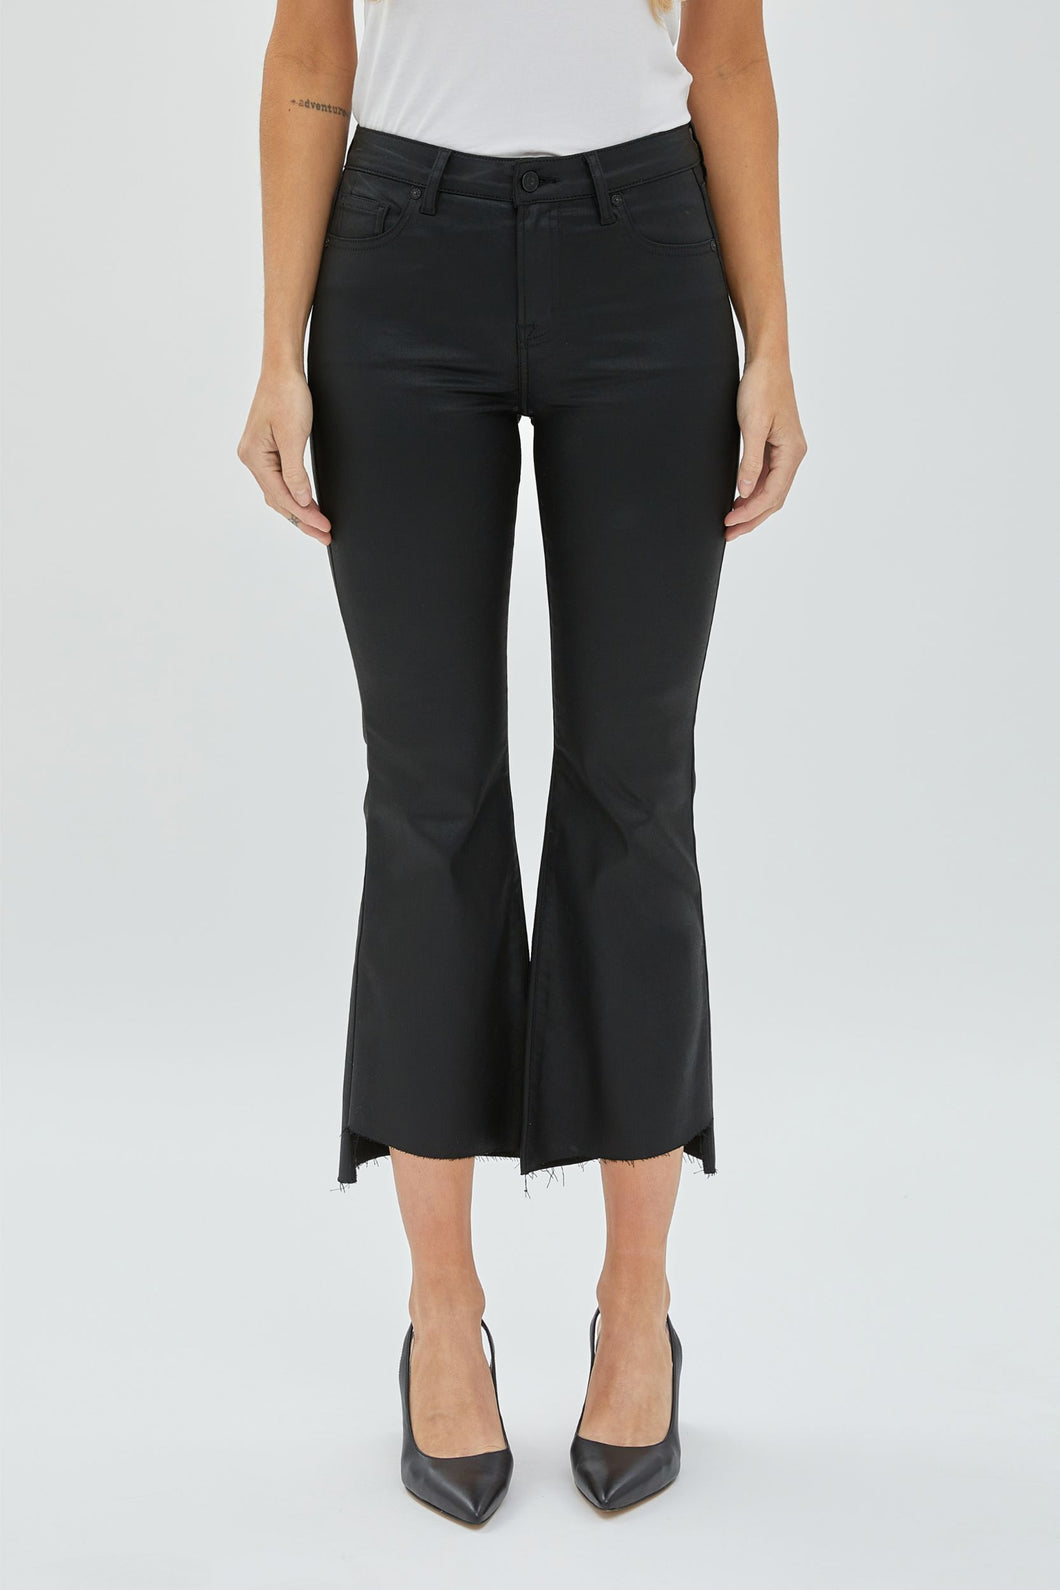 Hidden Jeans Coated Cropped Flare, Black